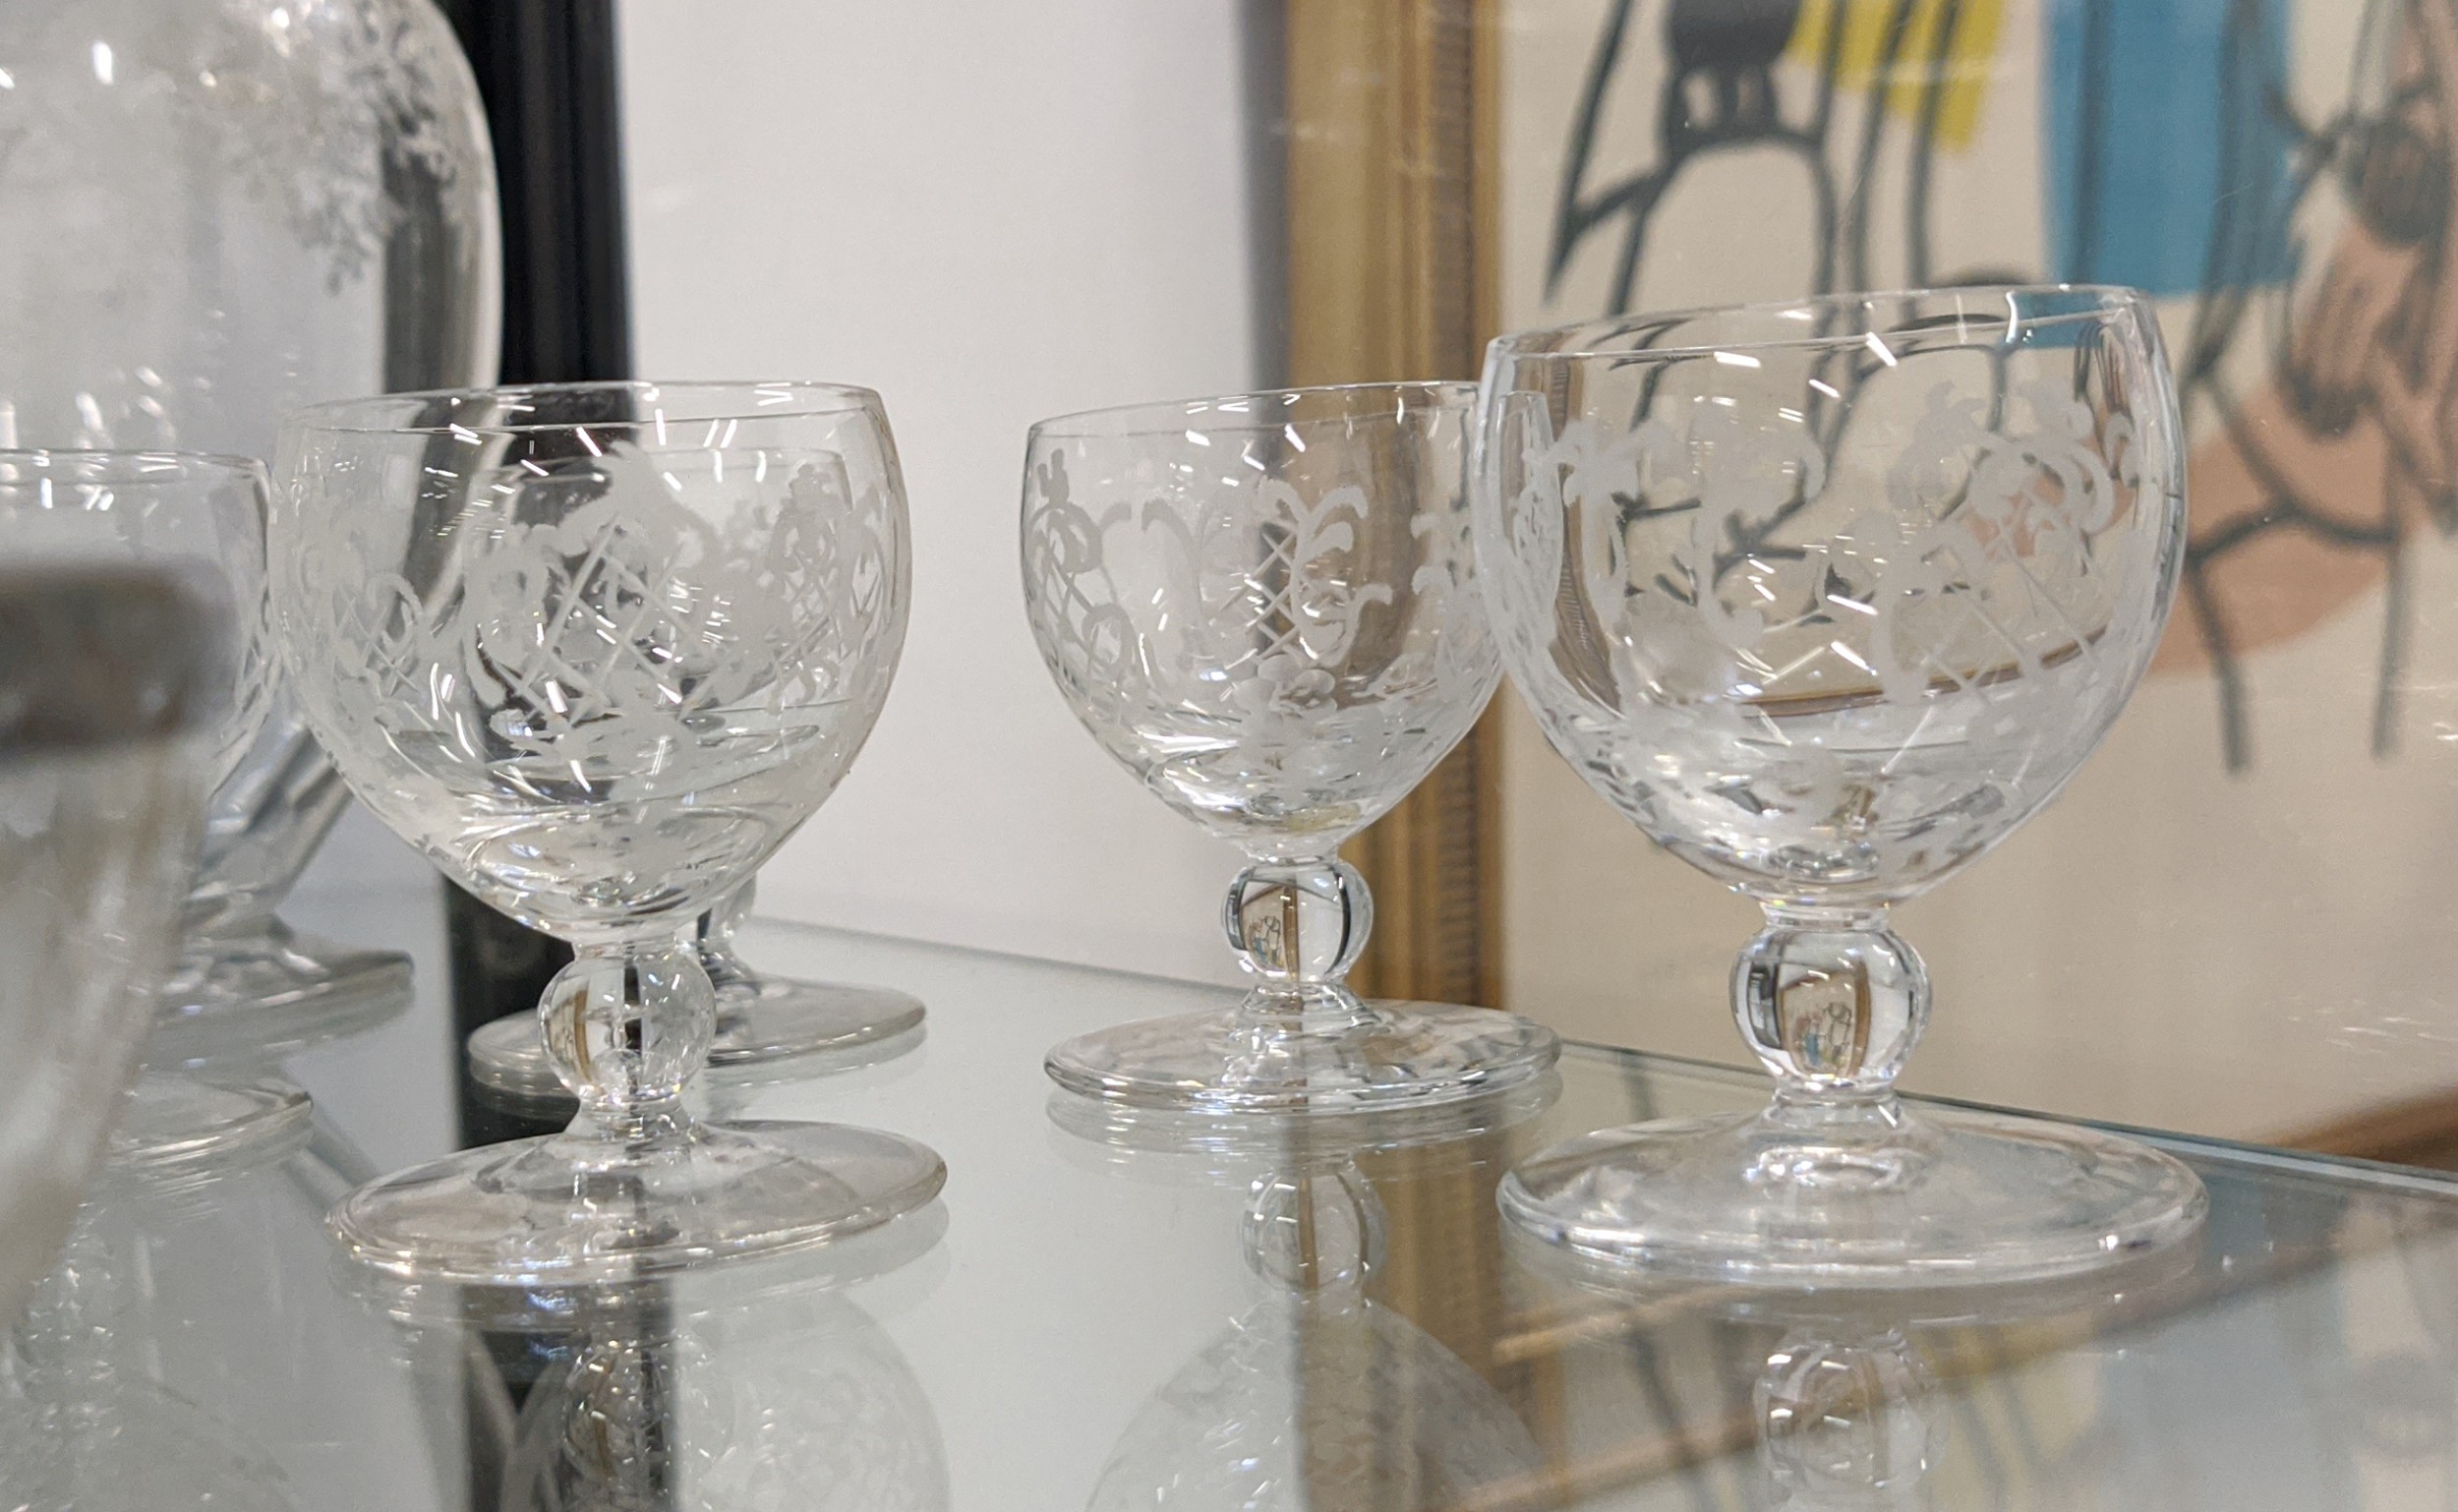 QUANTITY OF ENGRAVED GLASSWARE, including eight champagne flutes, decanter vodka glass set, eight - Image 7 of 9